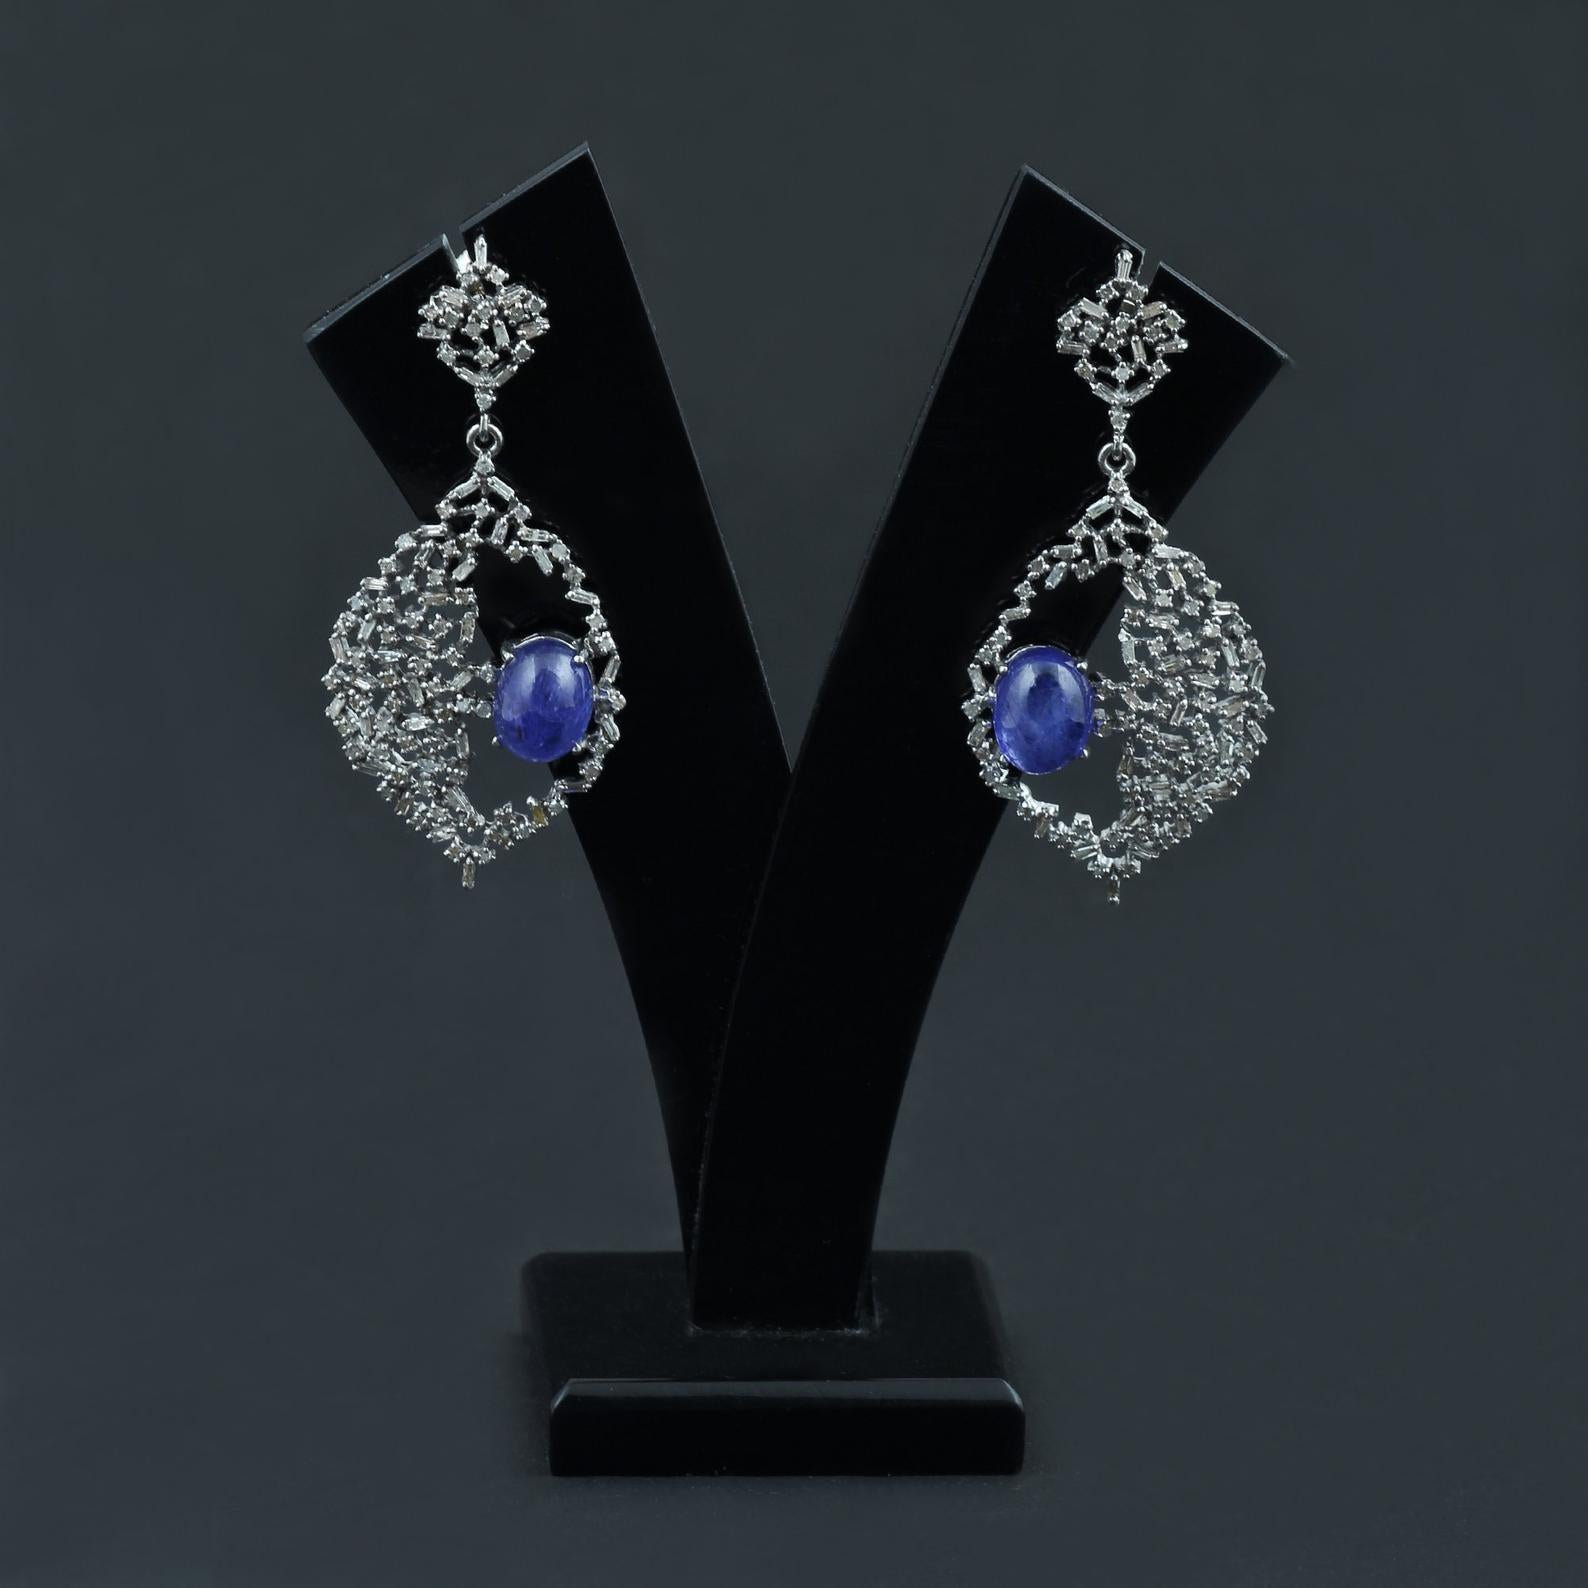 This dazzling pair of earrings are made with Large Natural Tanzanite Gemstone adorned with beautiful baguette diamonds in a modern design. These earrings reflect precise craftsmanship enough to delight any jewelry lover.